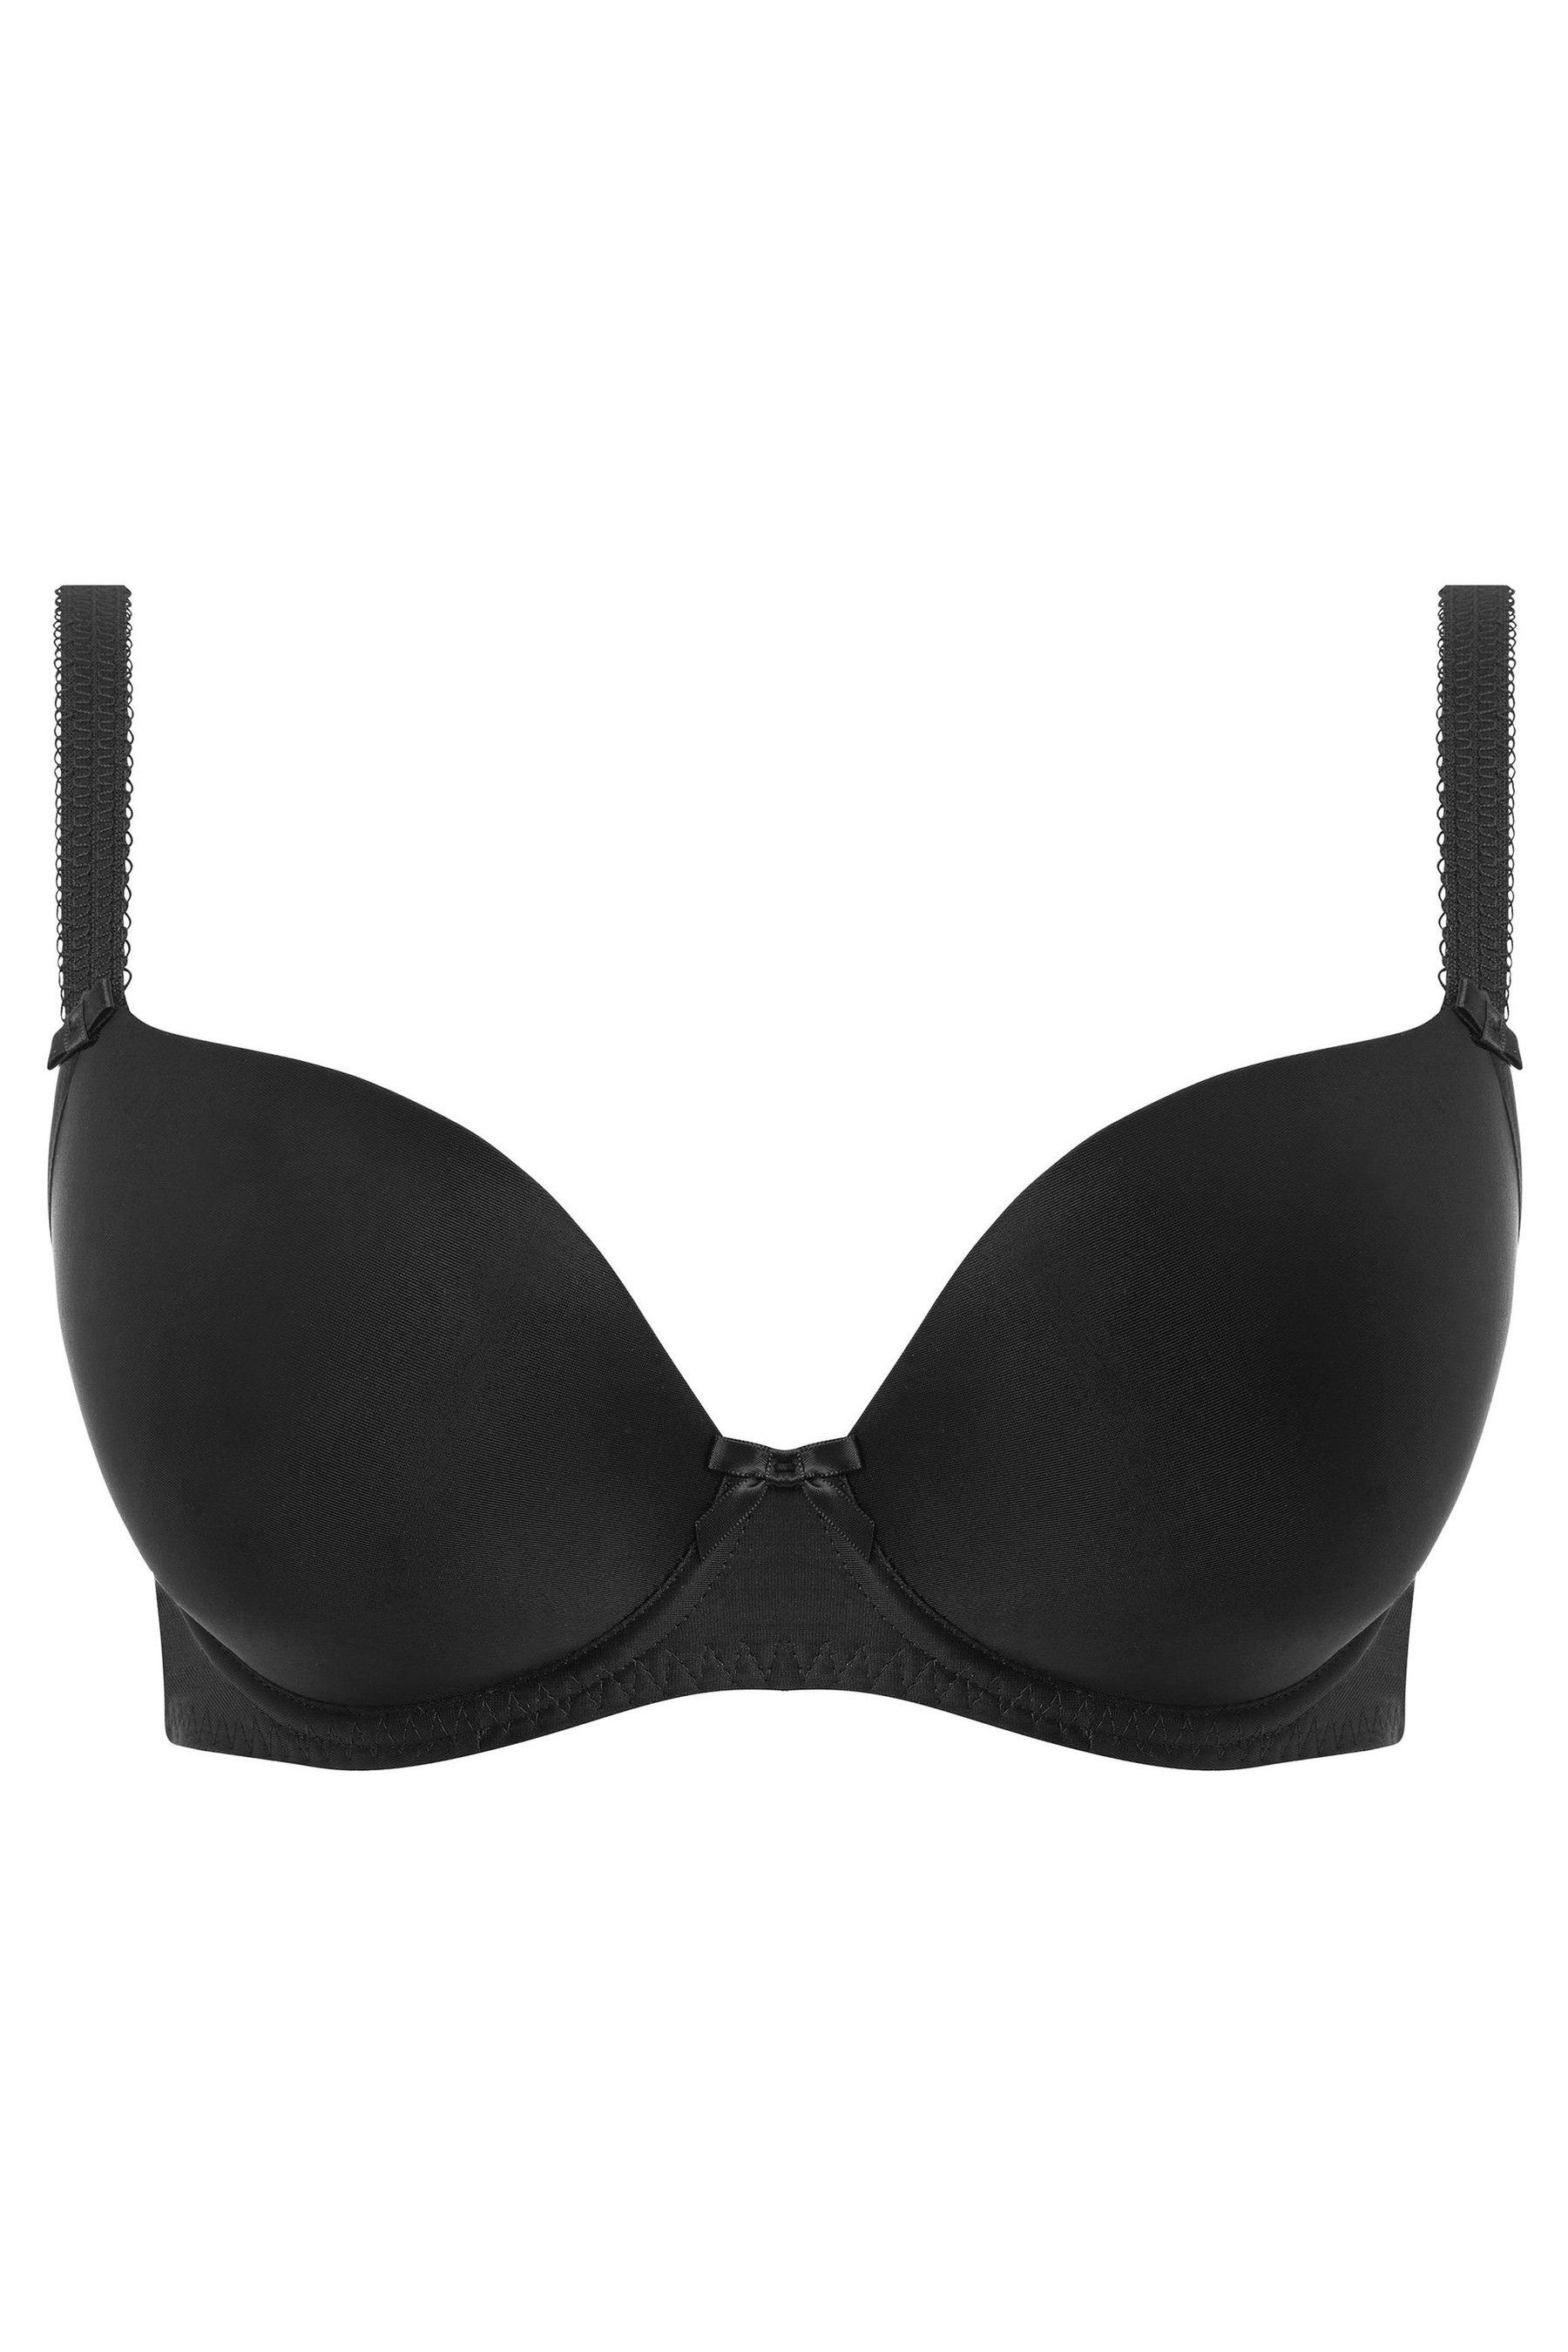 Buy Freya Deco Moulded Plunge Bra from the Next UK online shop